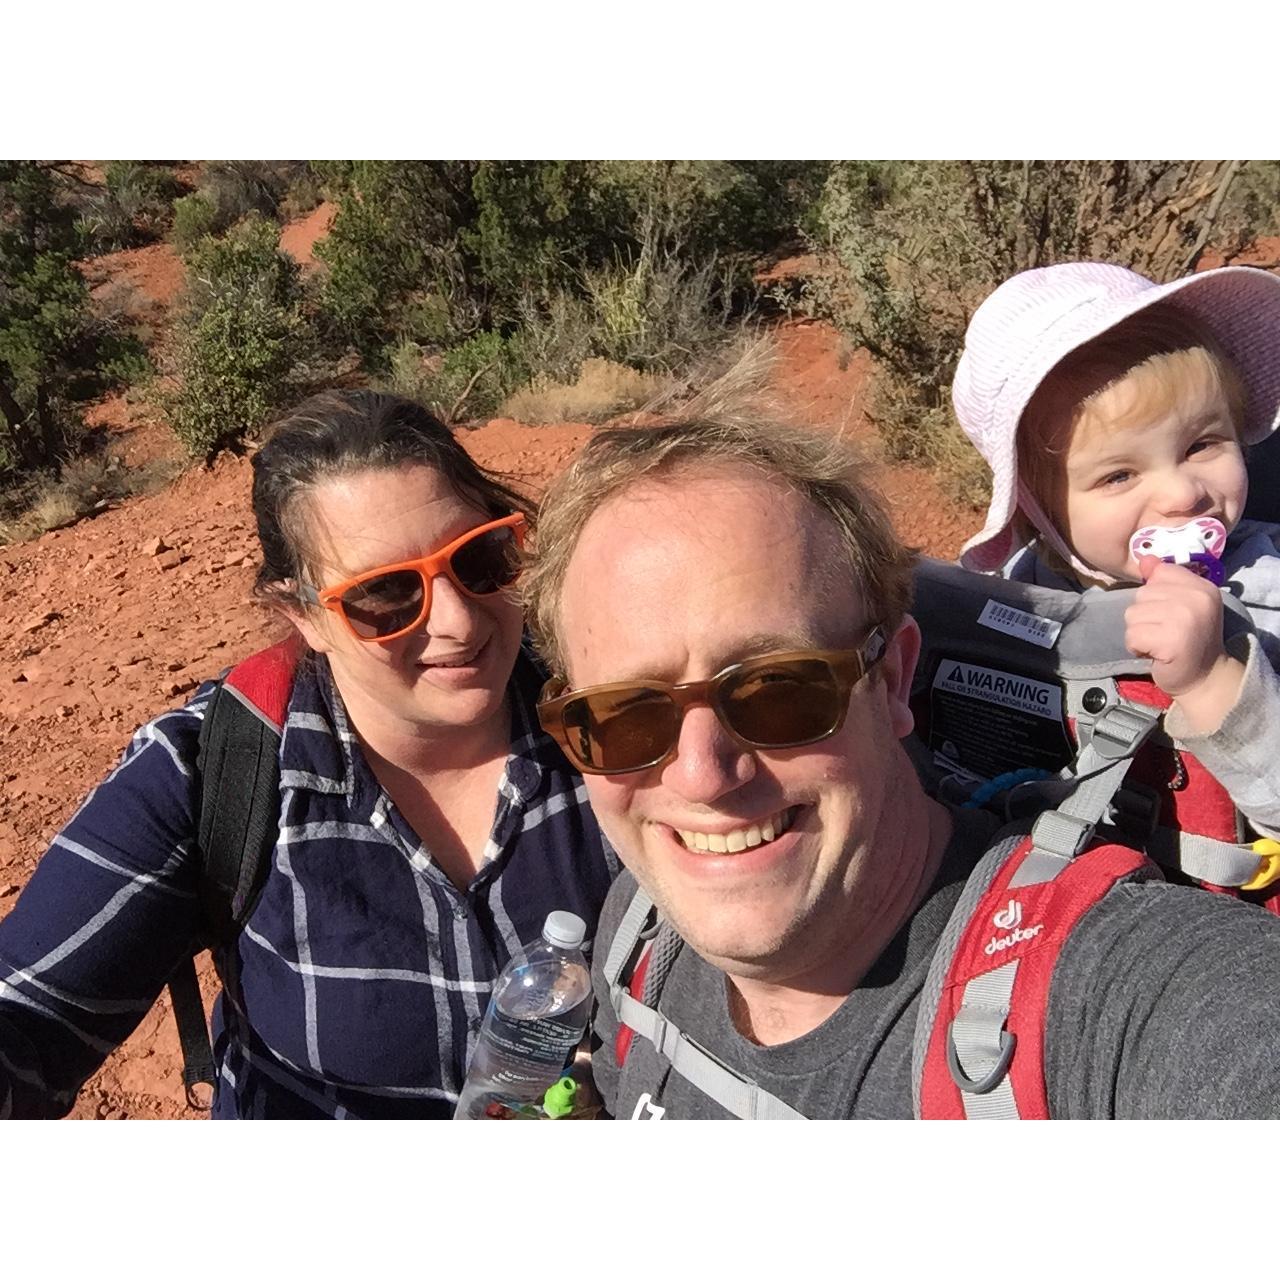 Travelling to Sedona 3 times in one year made us fall in love with the red rocks!